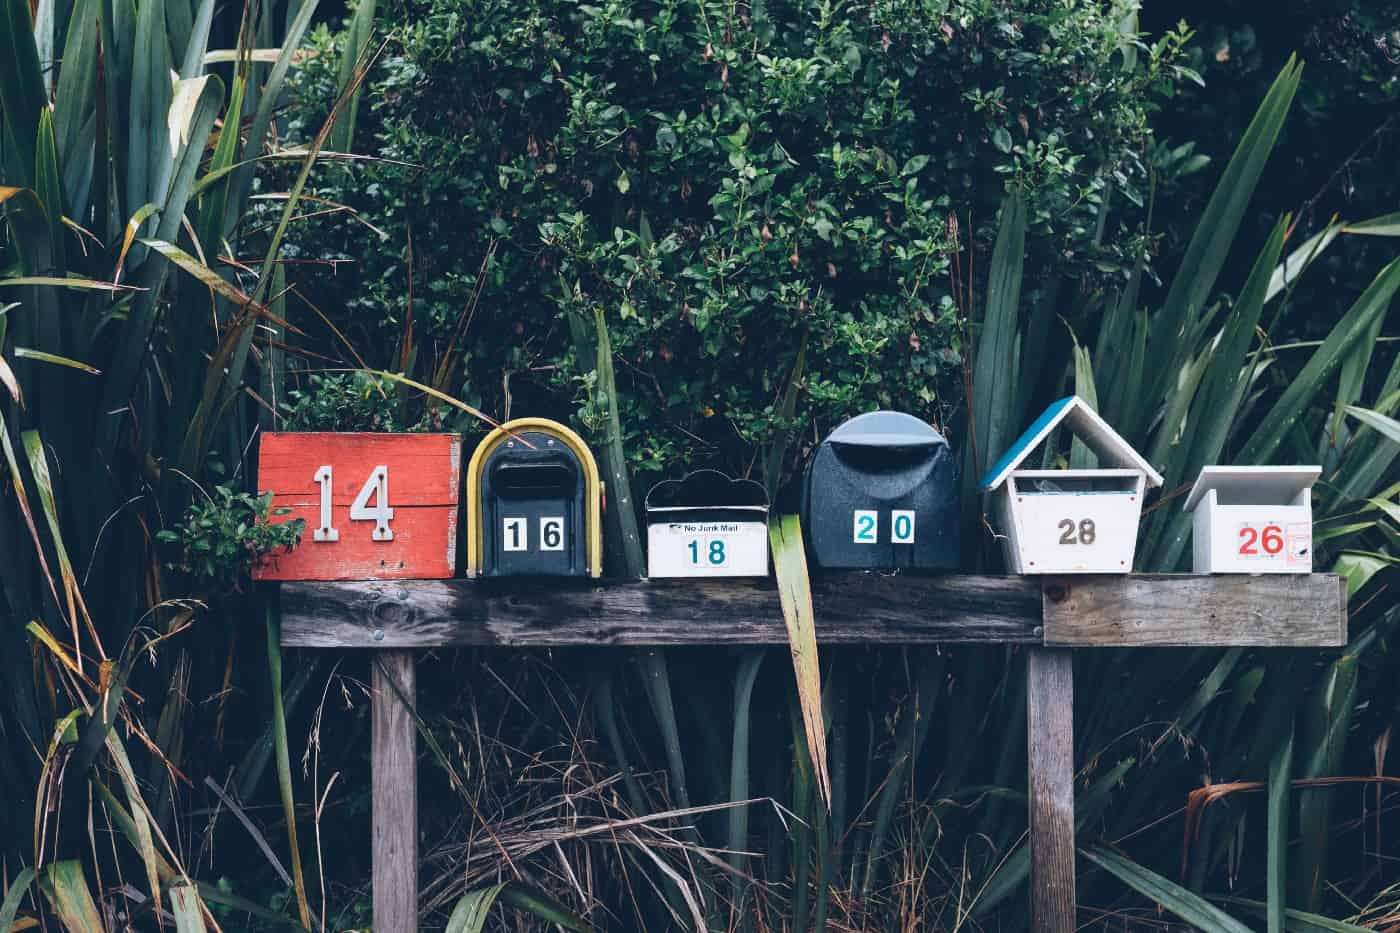 Six wooden mailboxes with different numbers